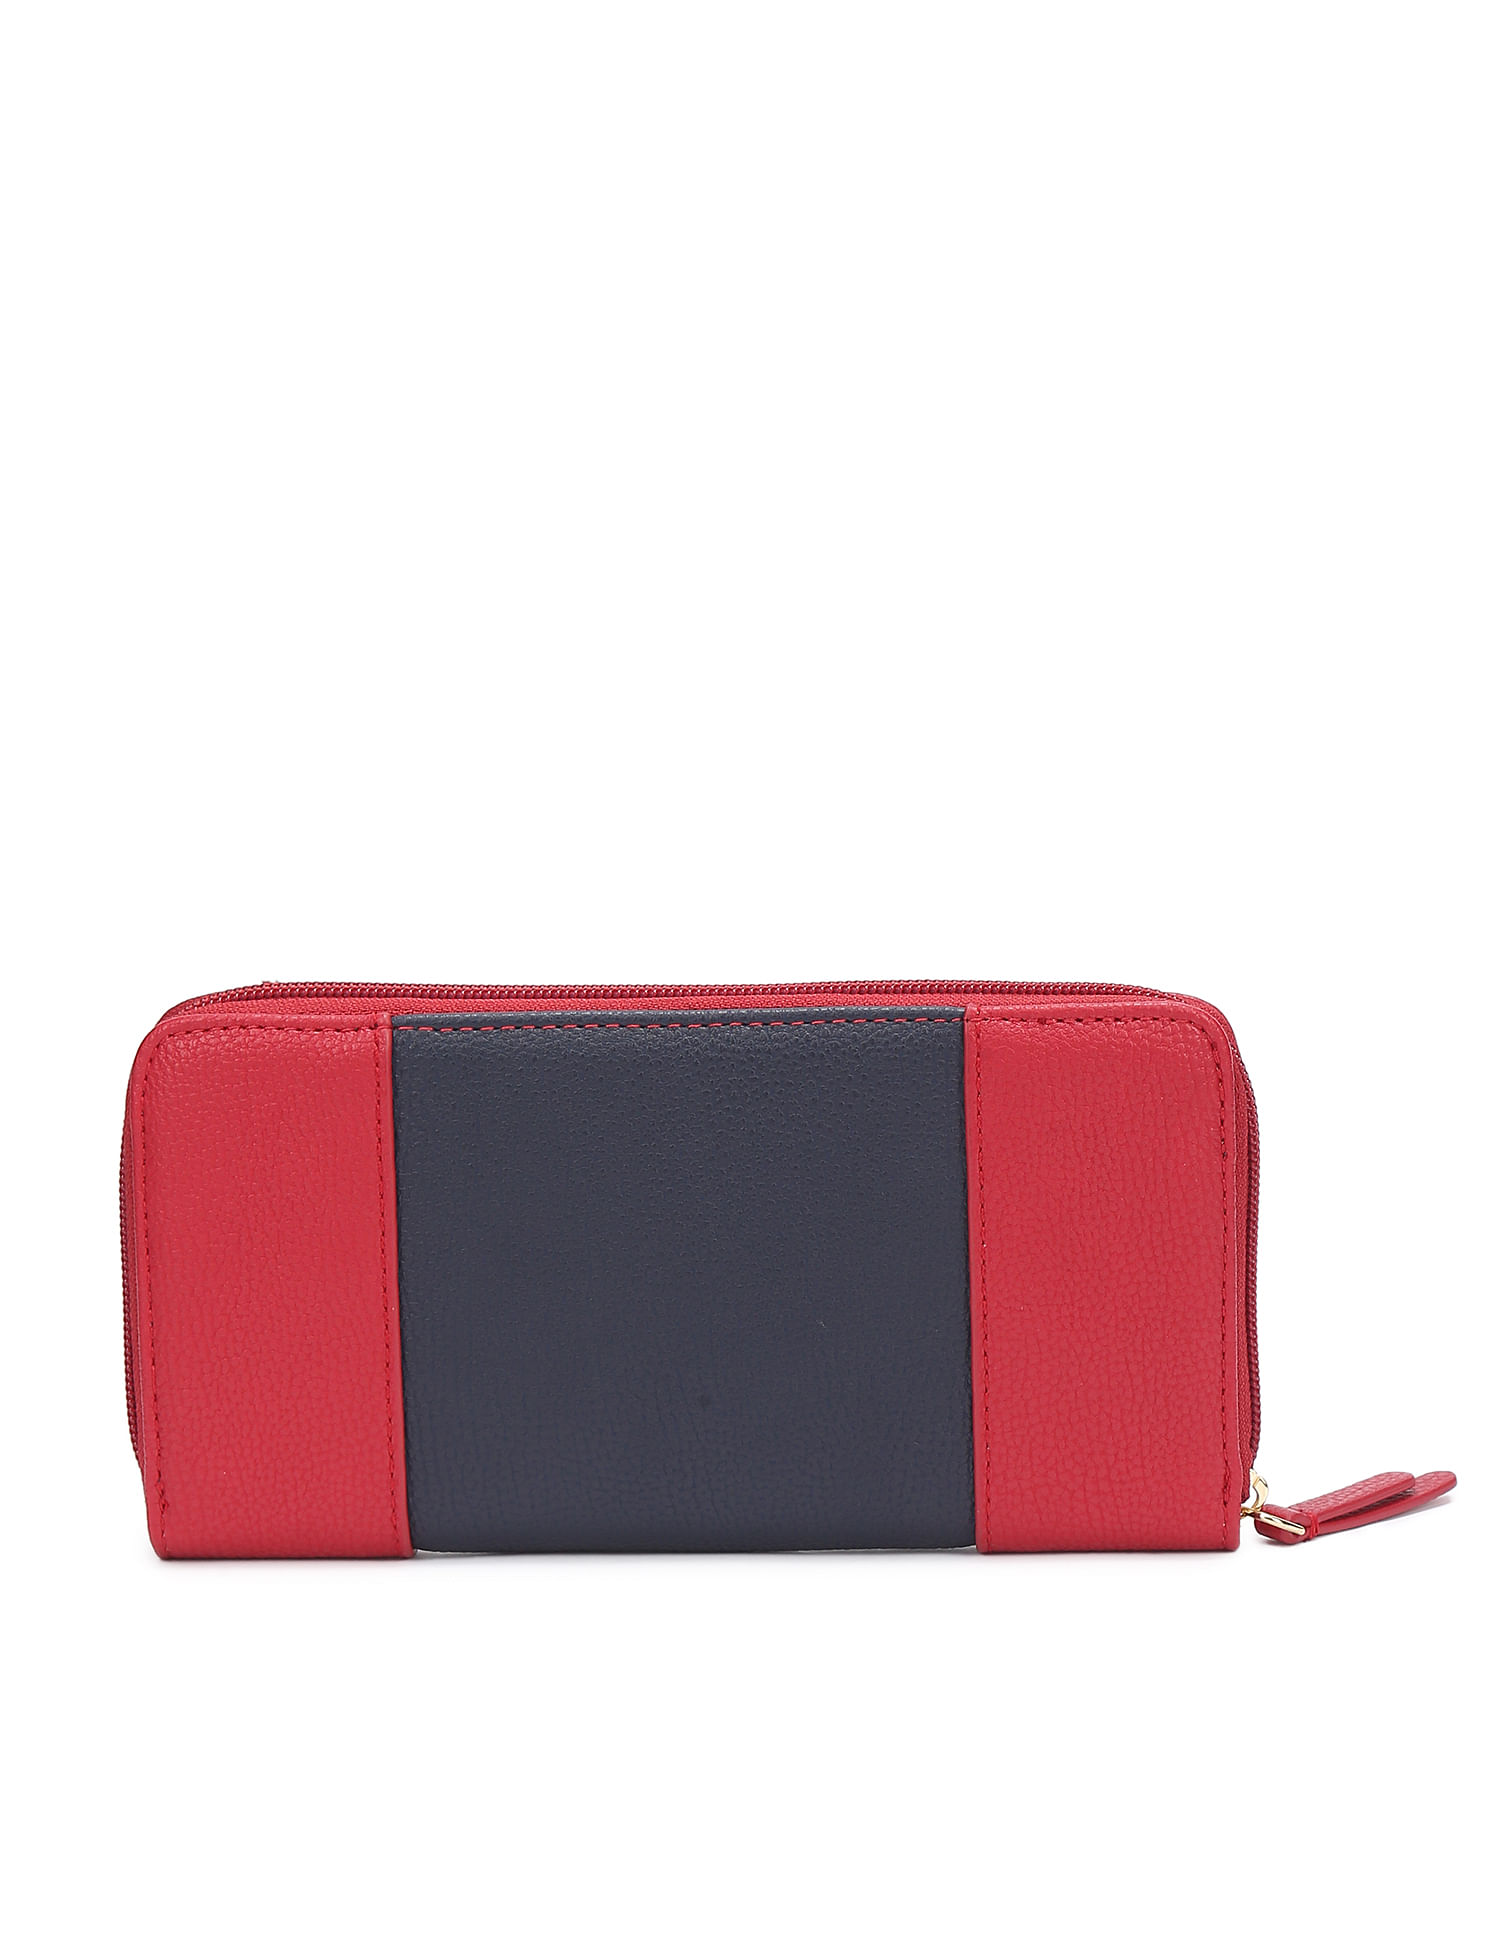 Buy Tommy Hilfiger Women Red & Navy Blue Colourblocked Leather Zip Around  Wallet - Wallets for Women 16076130